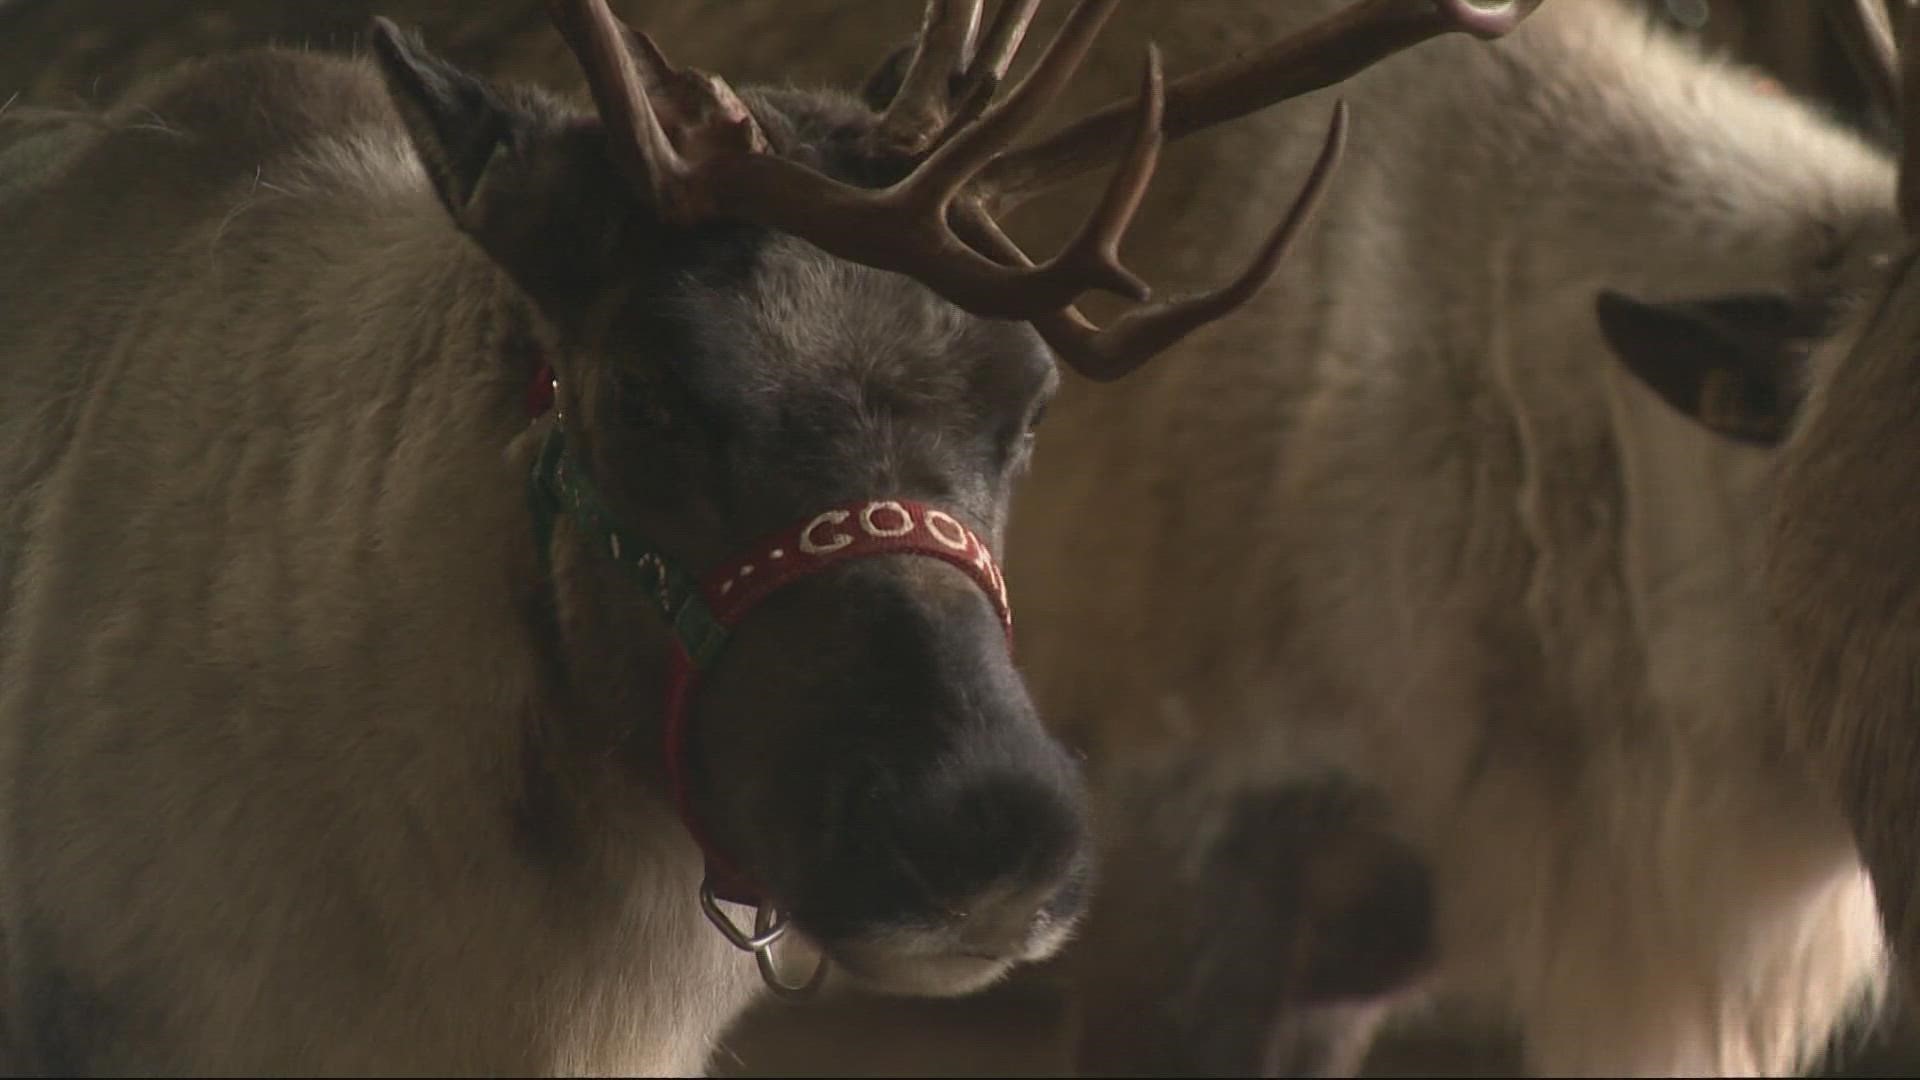 Oregon farm raises reindeer year-round for holiday visits 